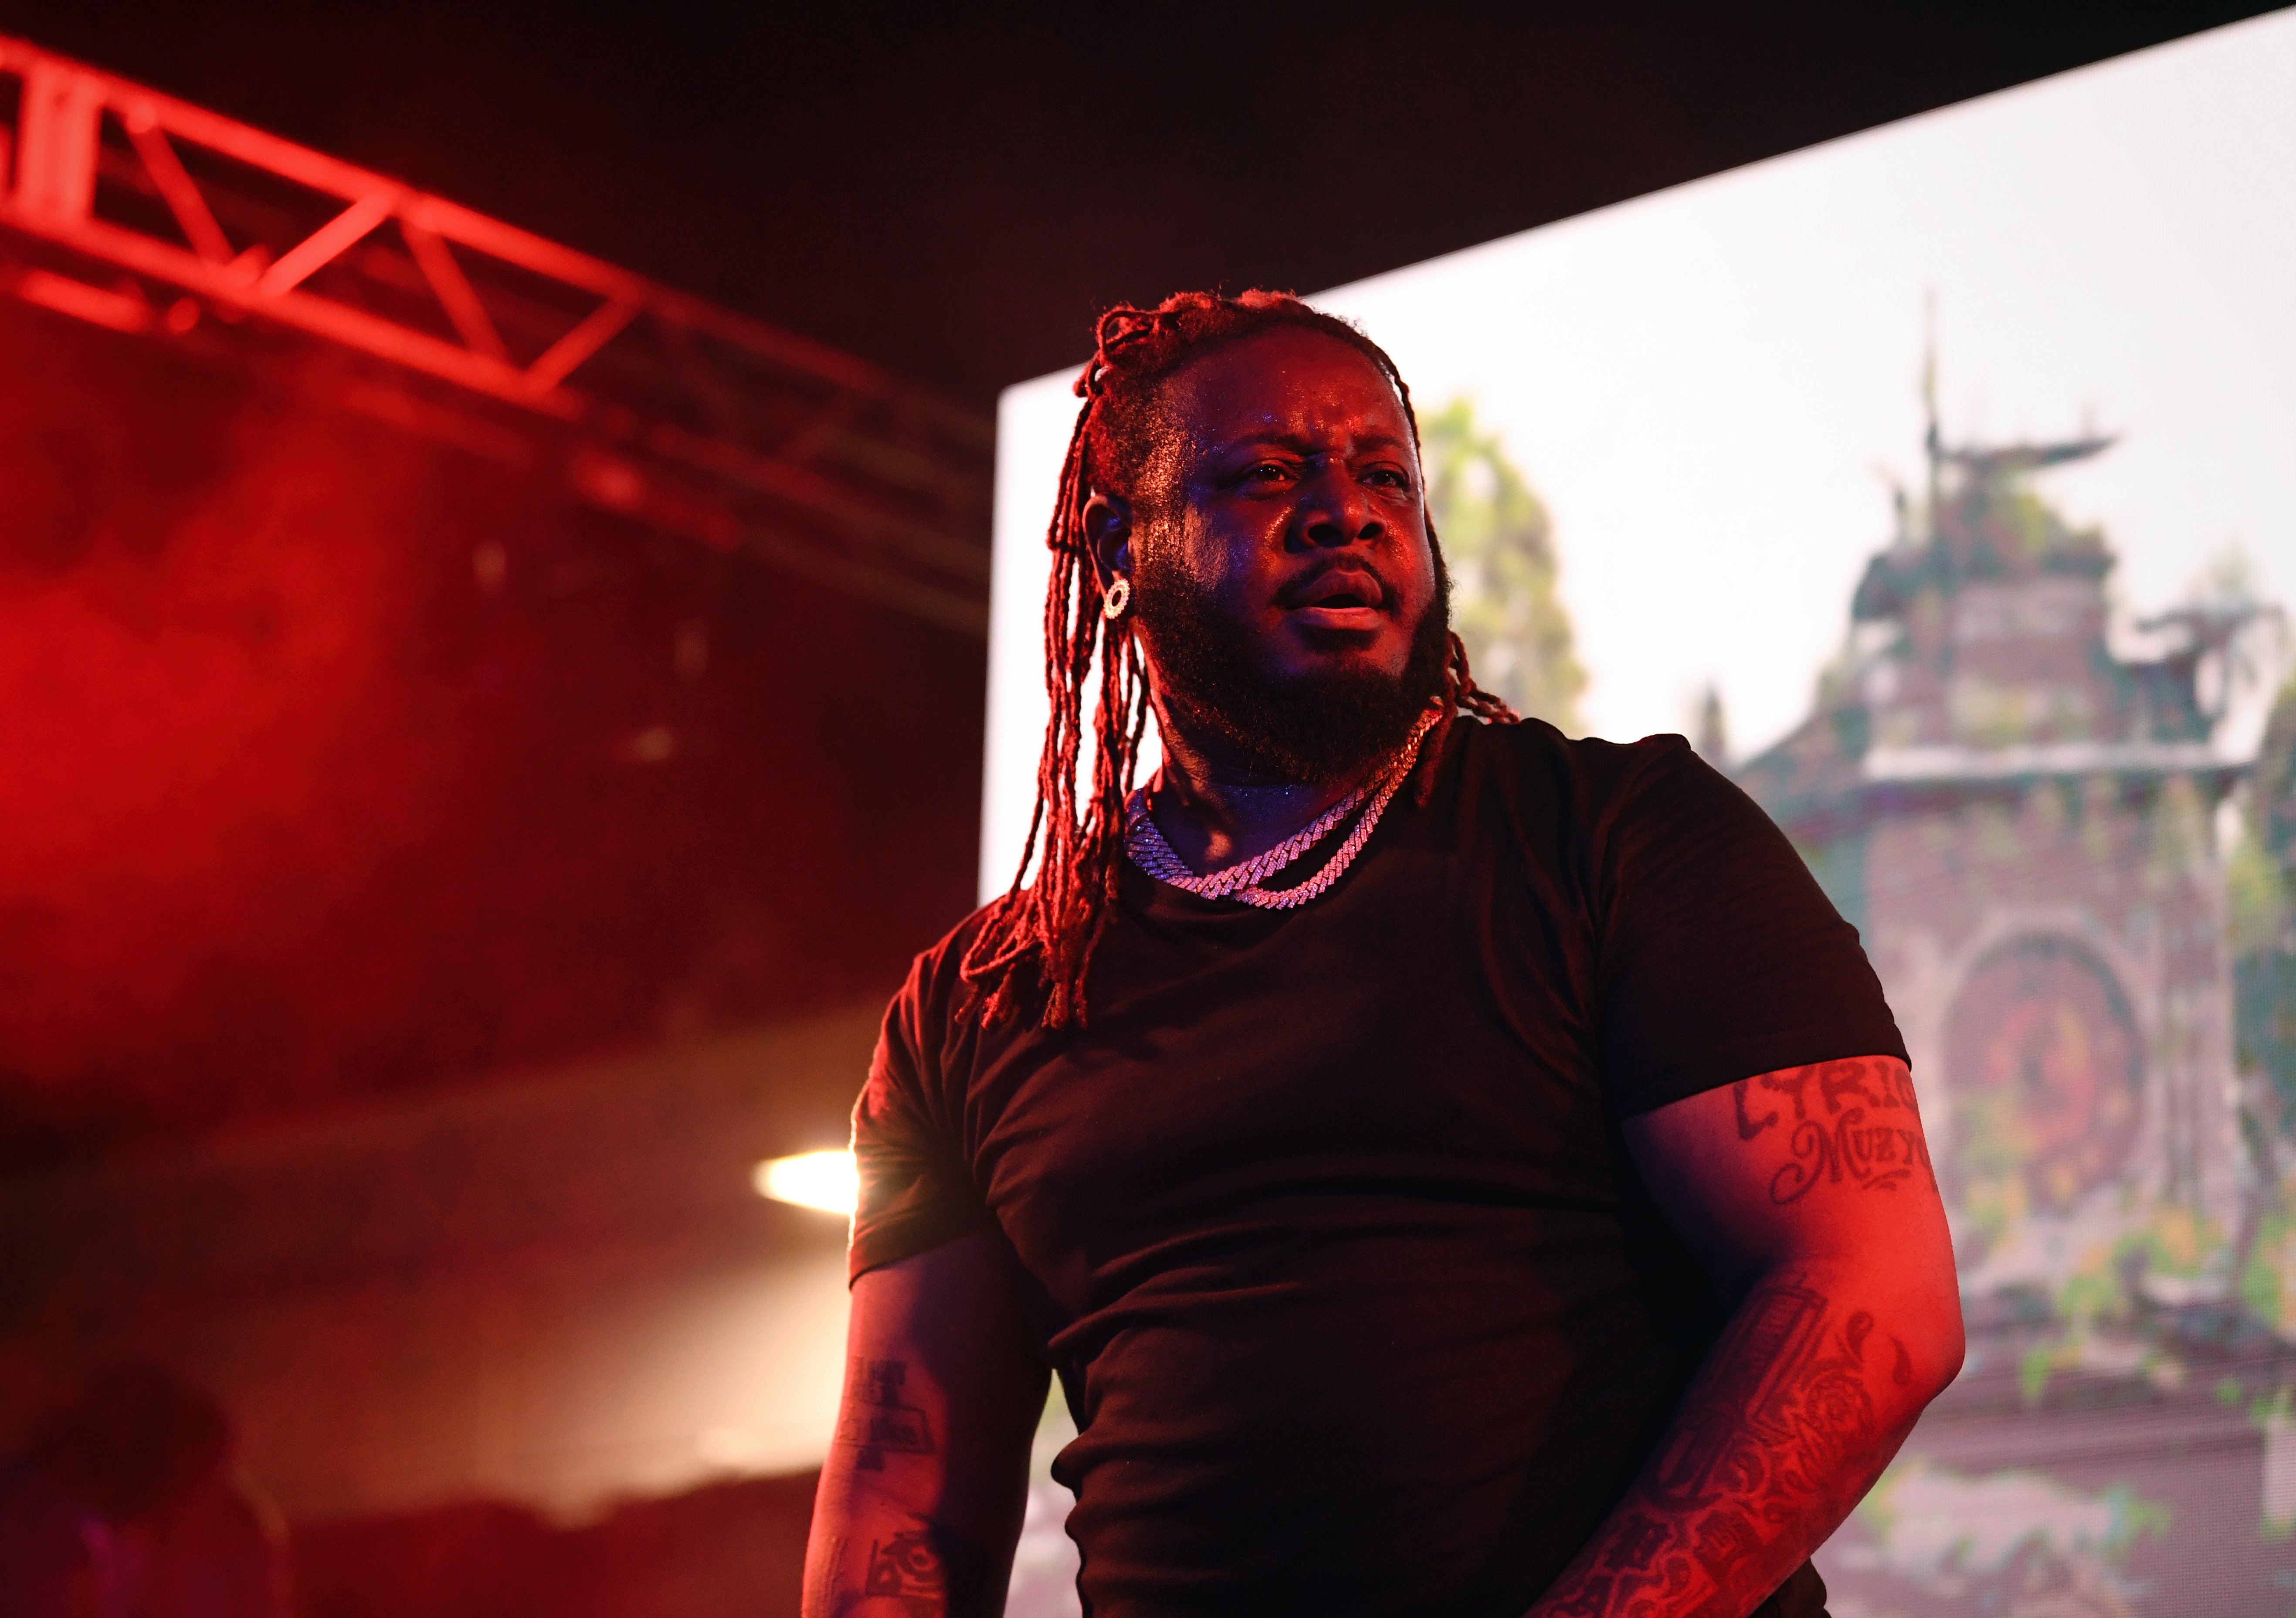 T-Pain Wants to Know What He Did to Cause Low Ticket Sales in Dallas: ‘What the S*** Dallas?!’